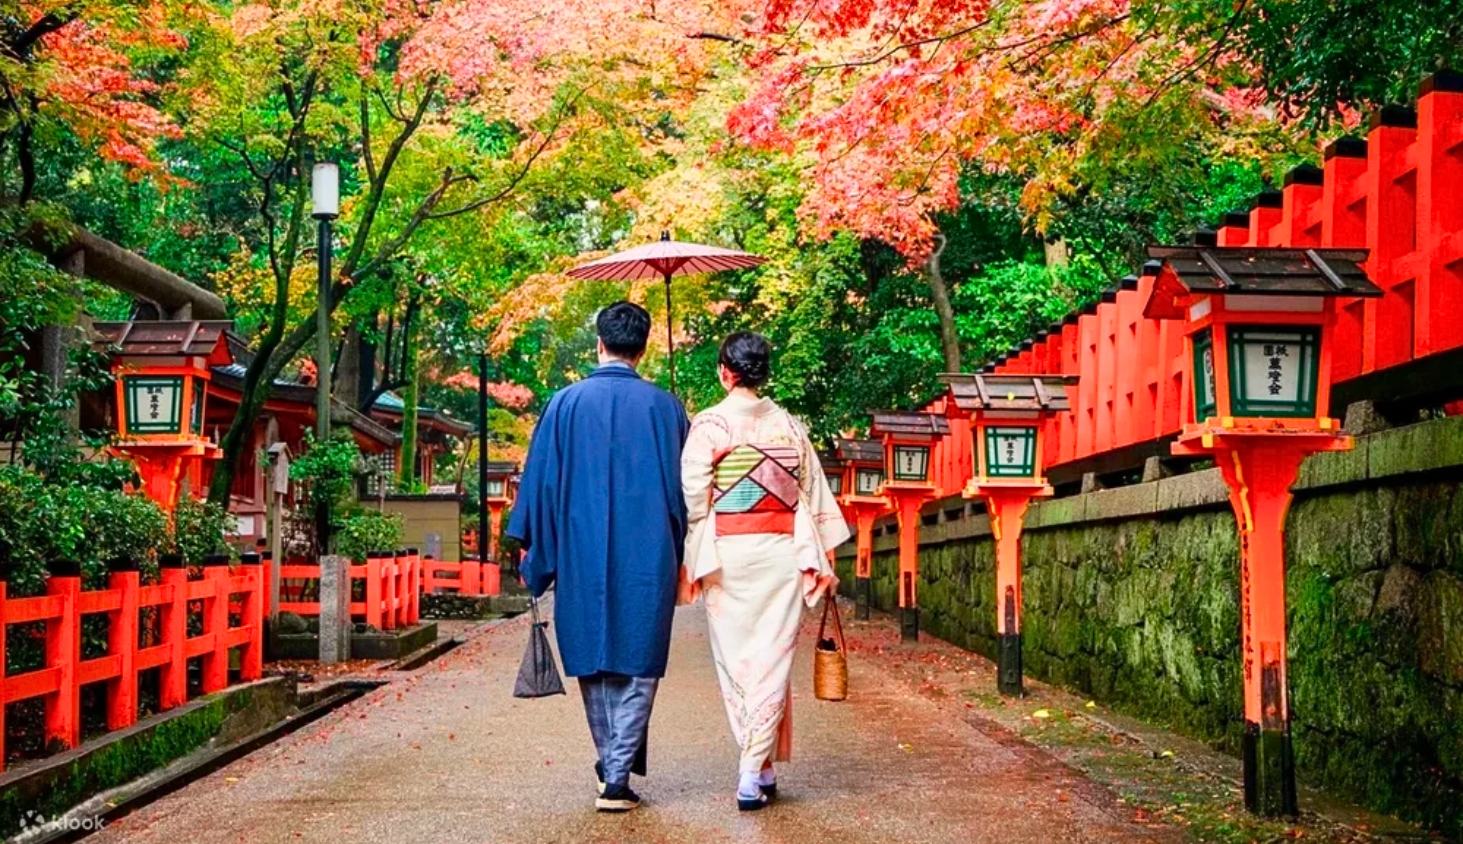 Dress Up in a Kimono during Autumn. inJapan